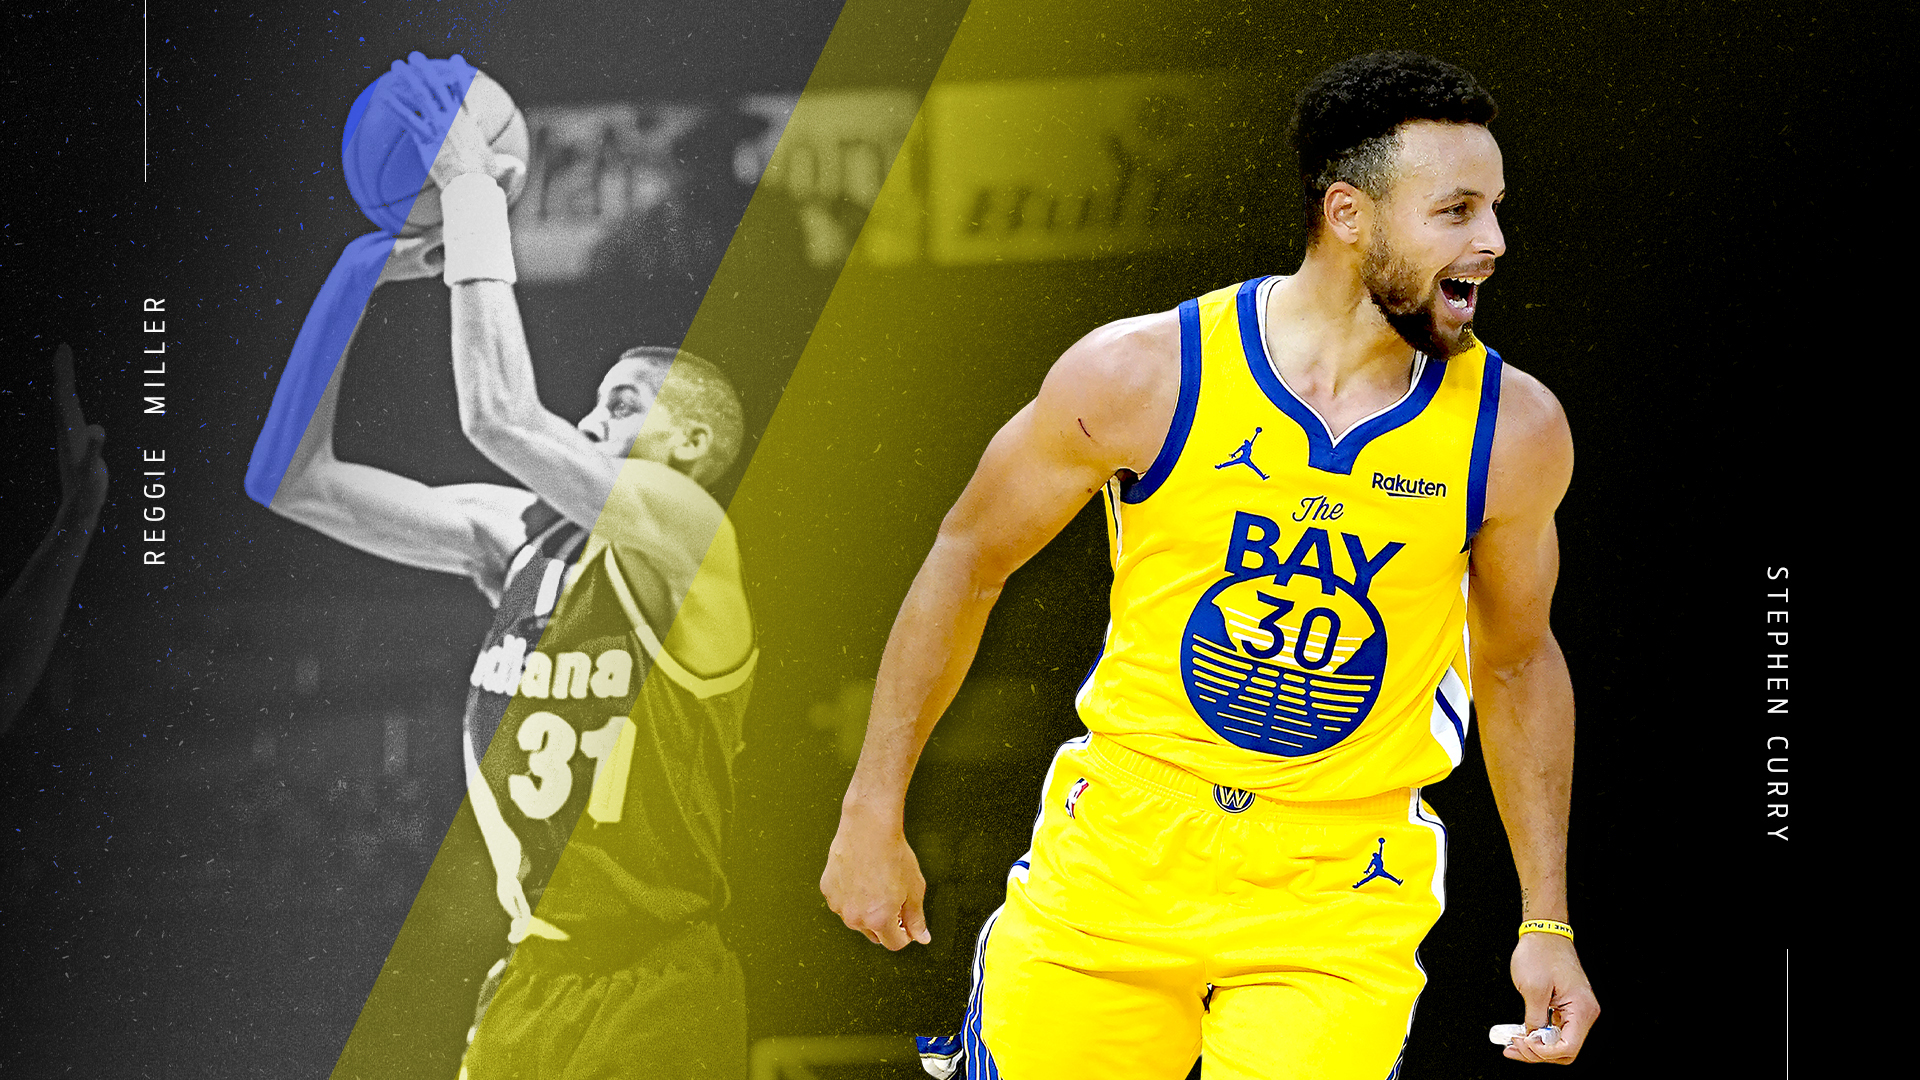 Steph Curry Wallpaper Projects